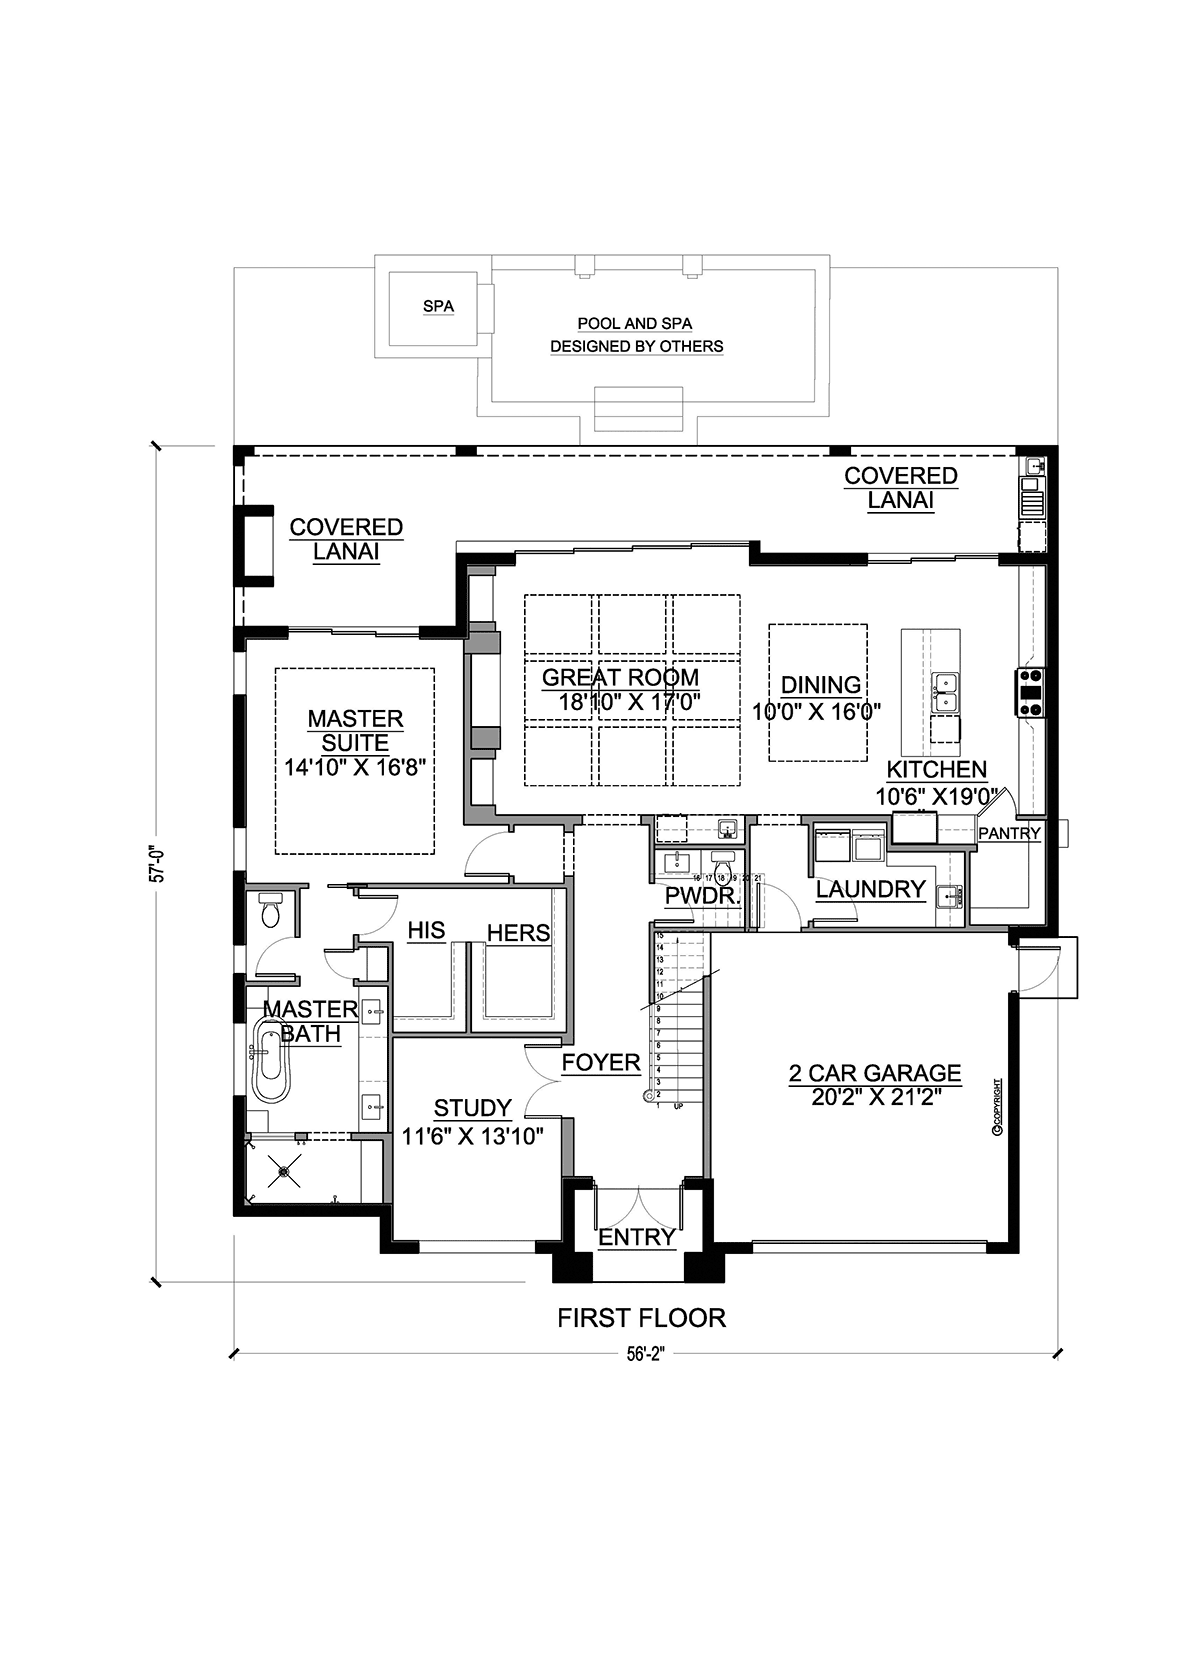 Contemporary, Modern House Plan 77631 with 4 Bed, 5 Bath, 2 Car Garage Level One